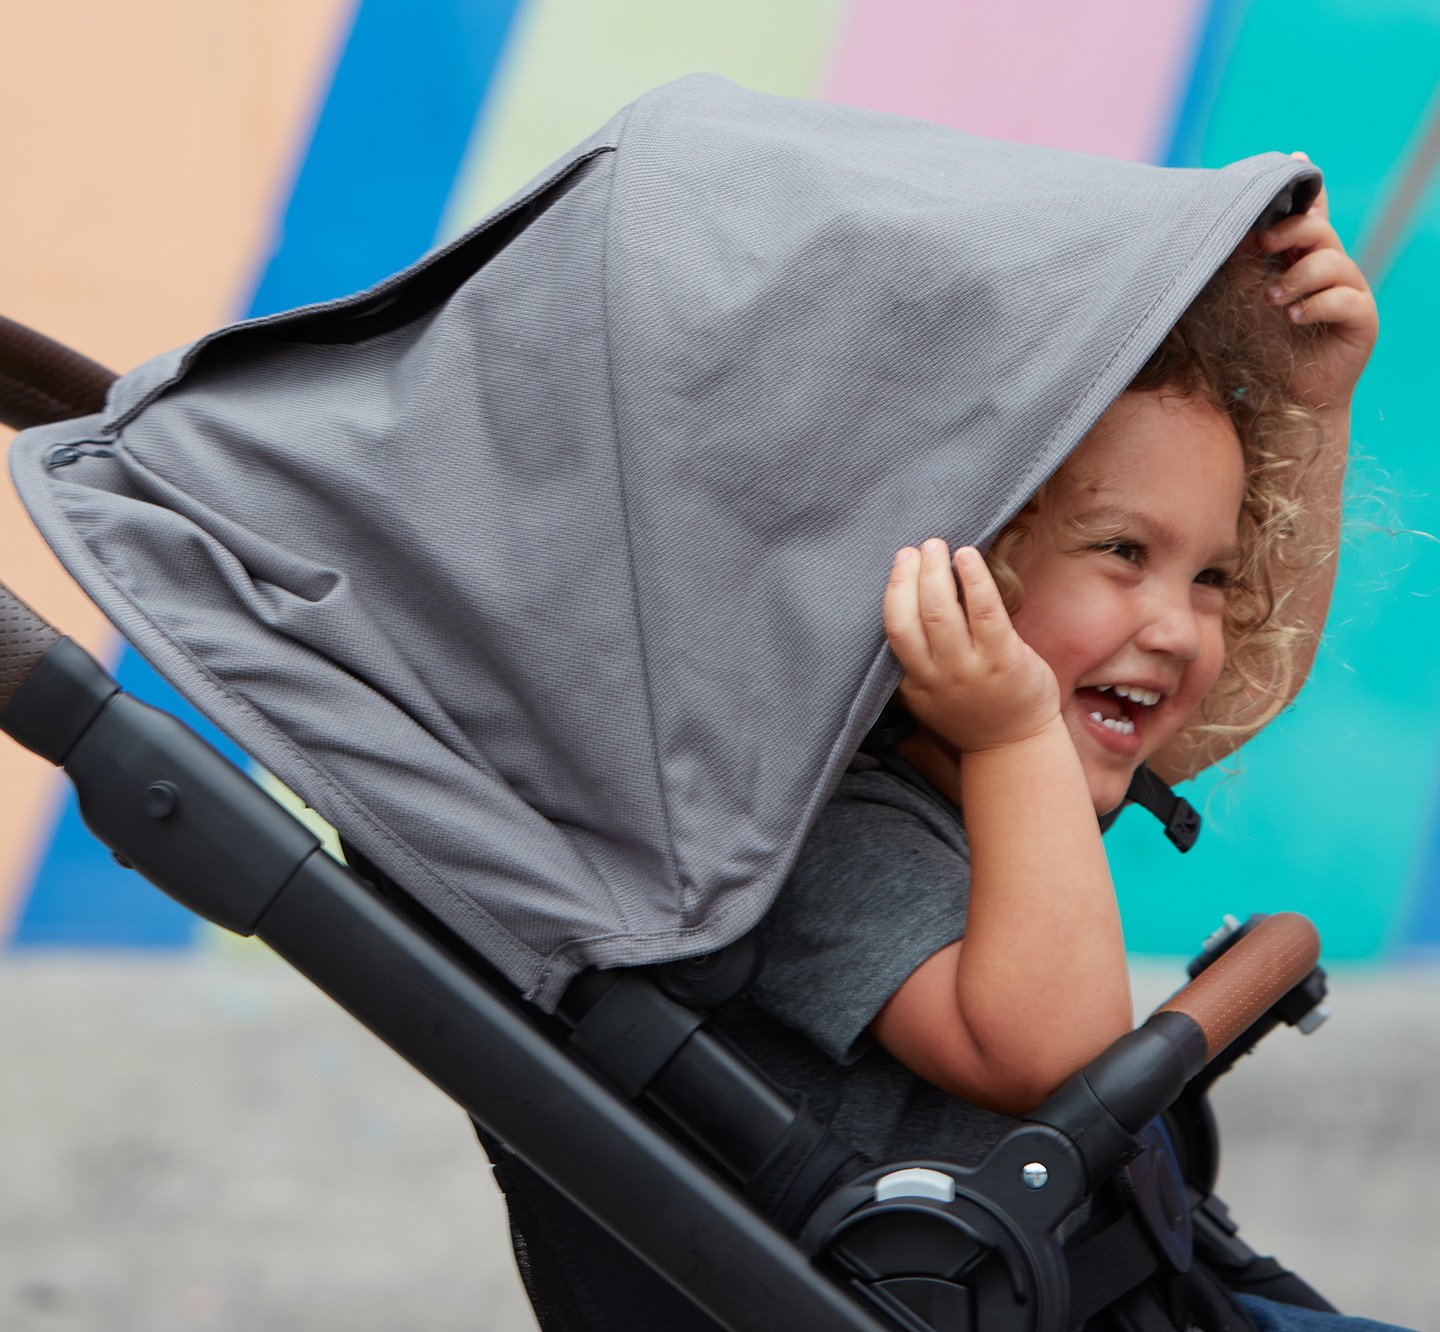 child in baby stroller, laughing